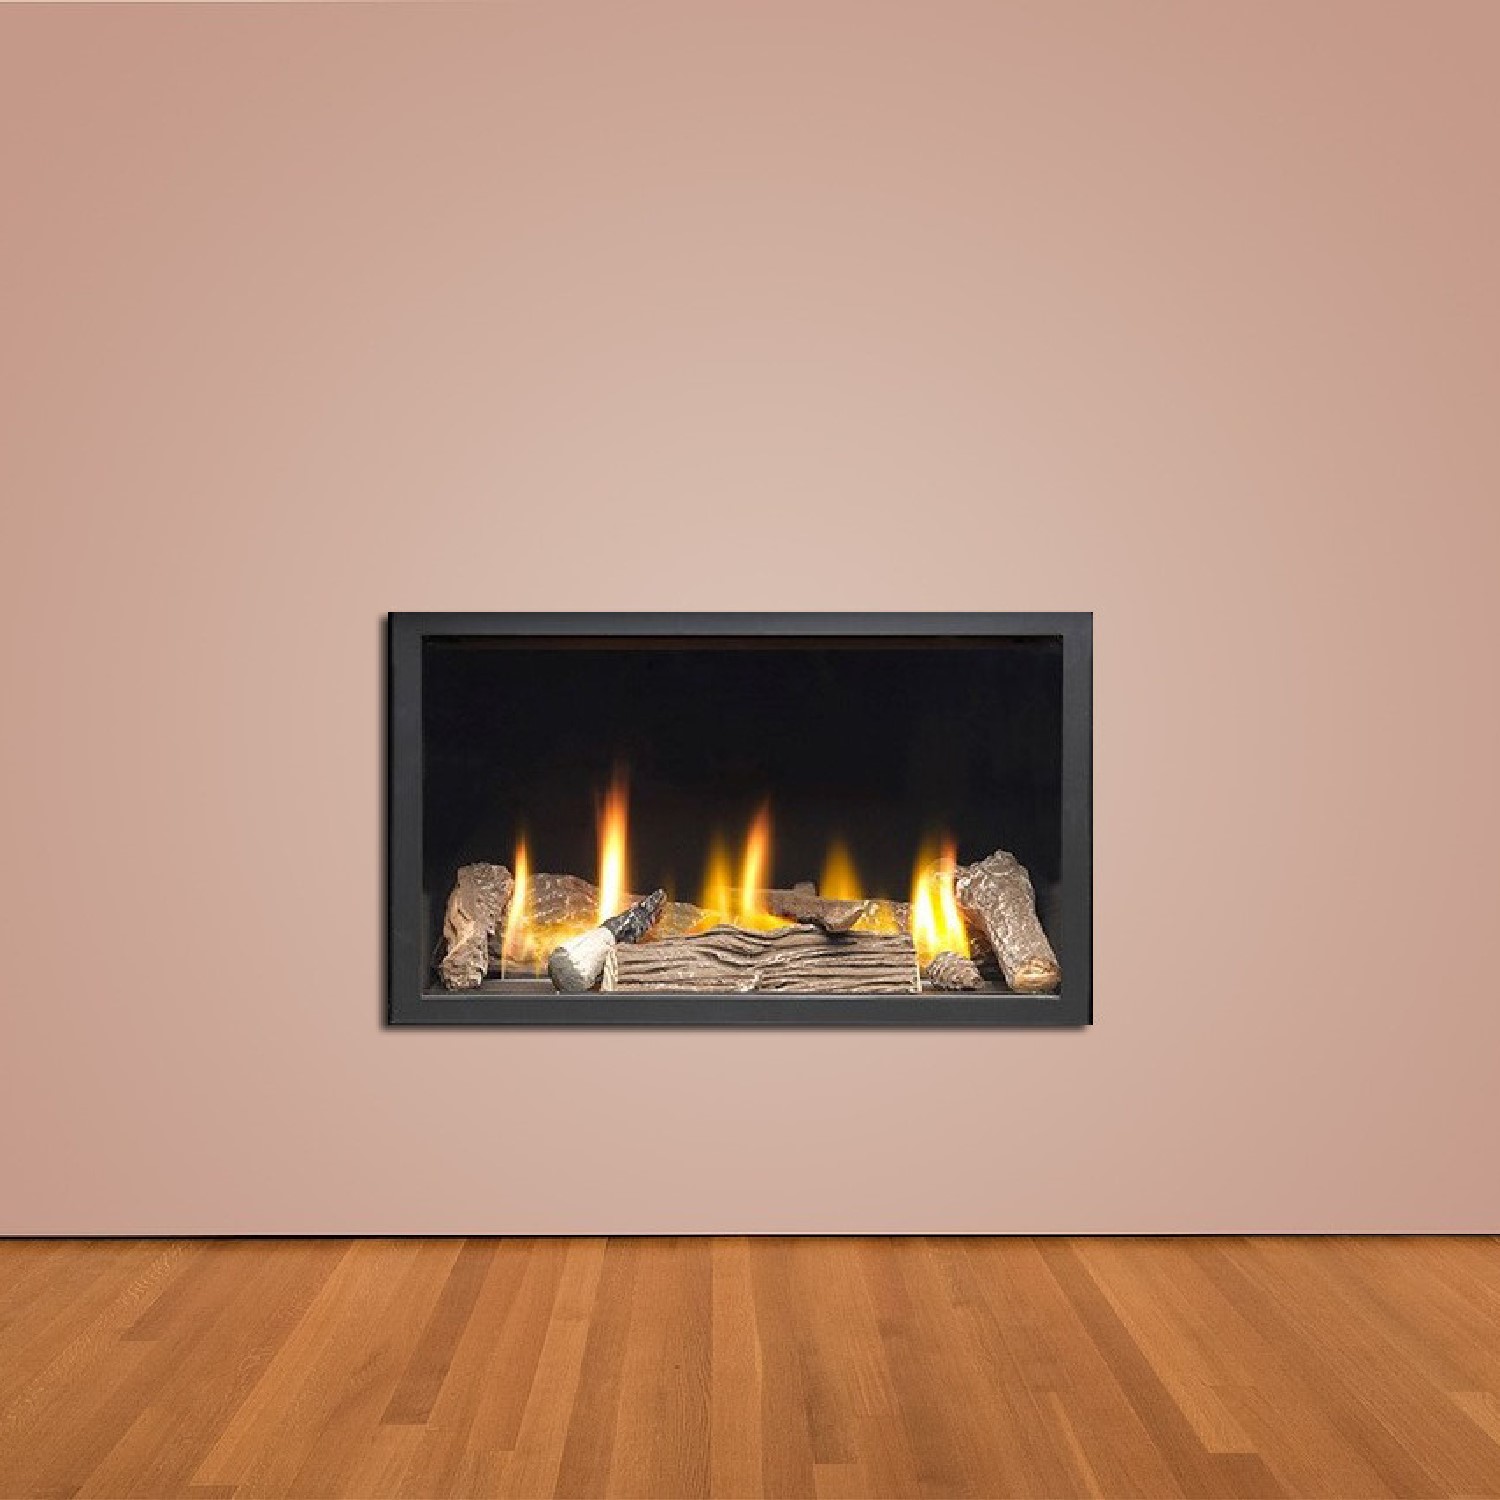 Photo of Frameless black inset gas fire with logs - vola 600